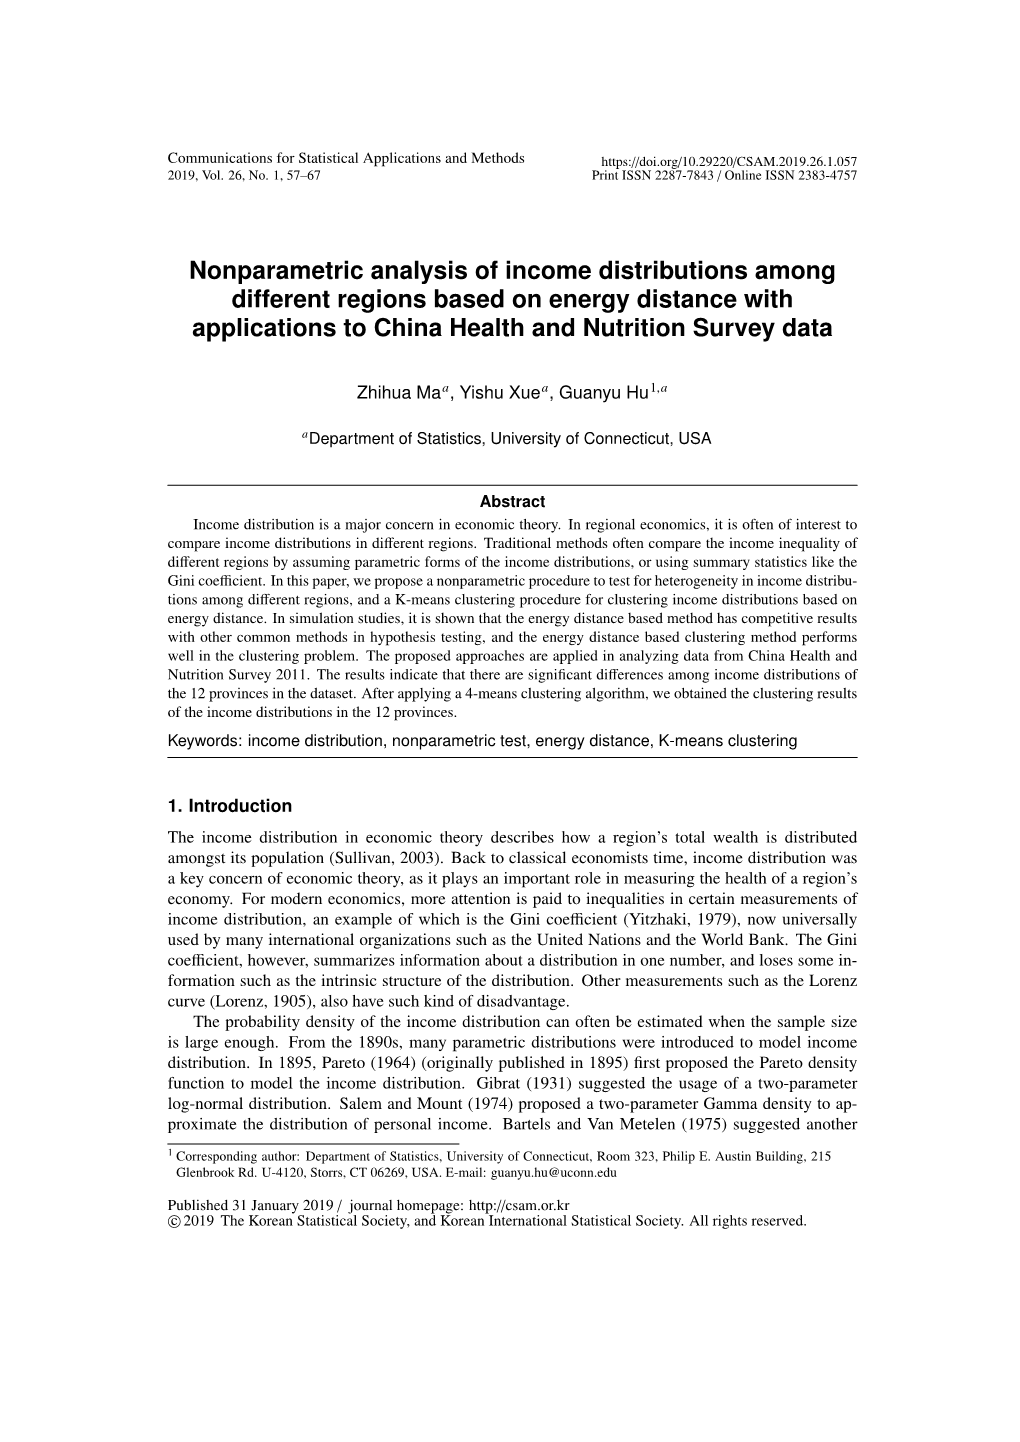 Nonparametric Analysis of Income Distributions Among Different Regions Based on Energy Distance with Applications to China Health and Nutrition Survey Data